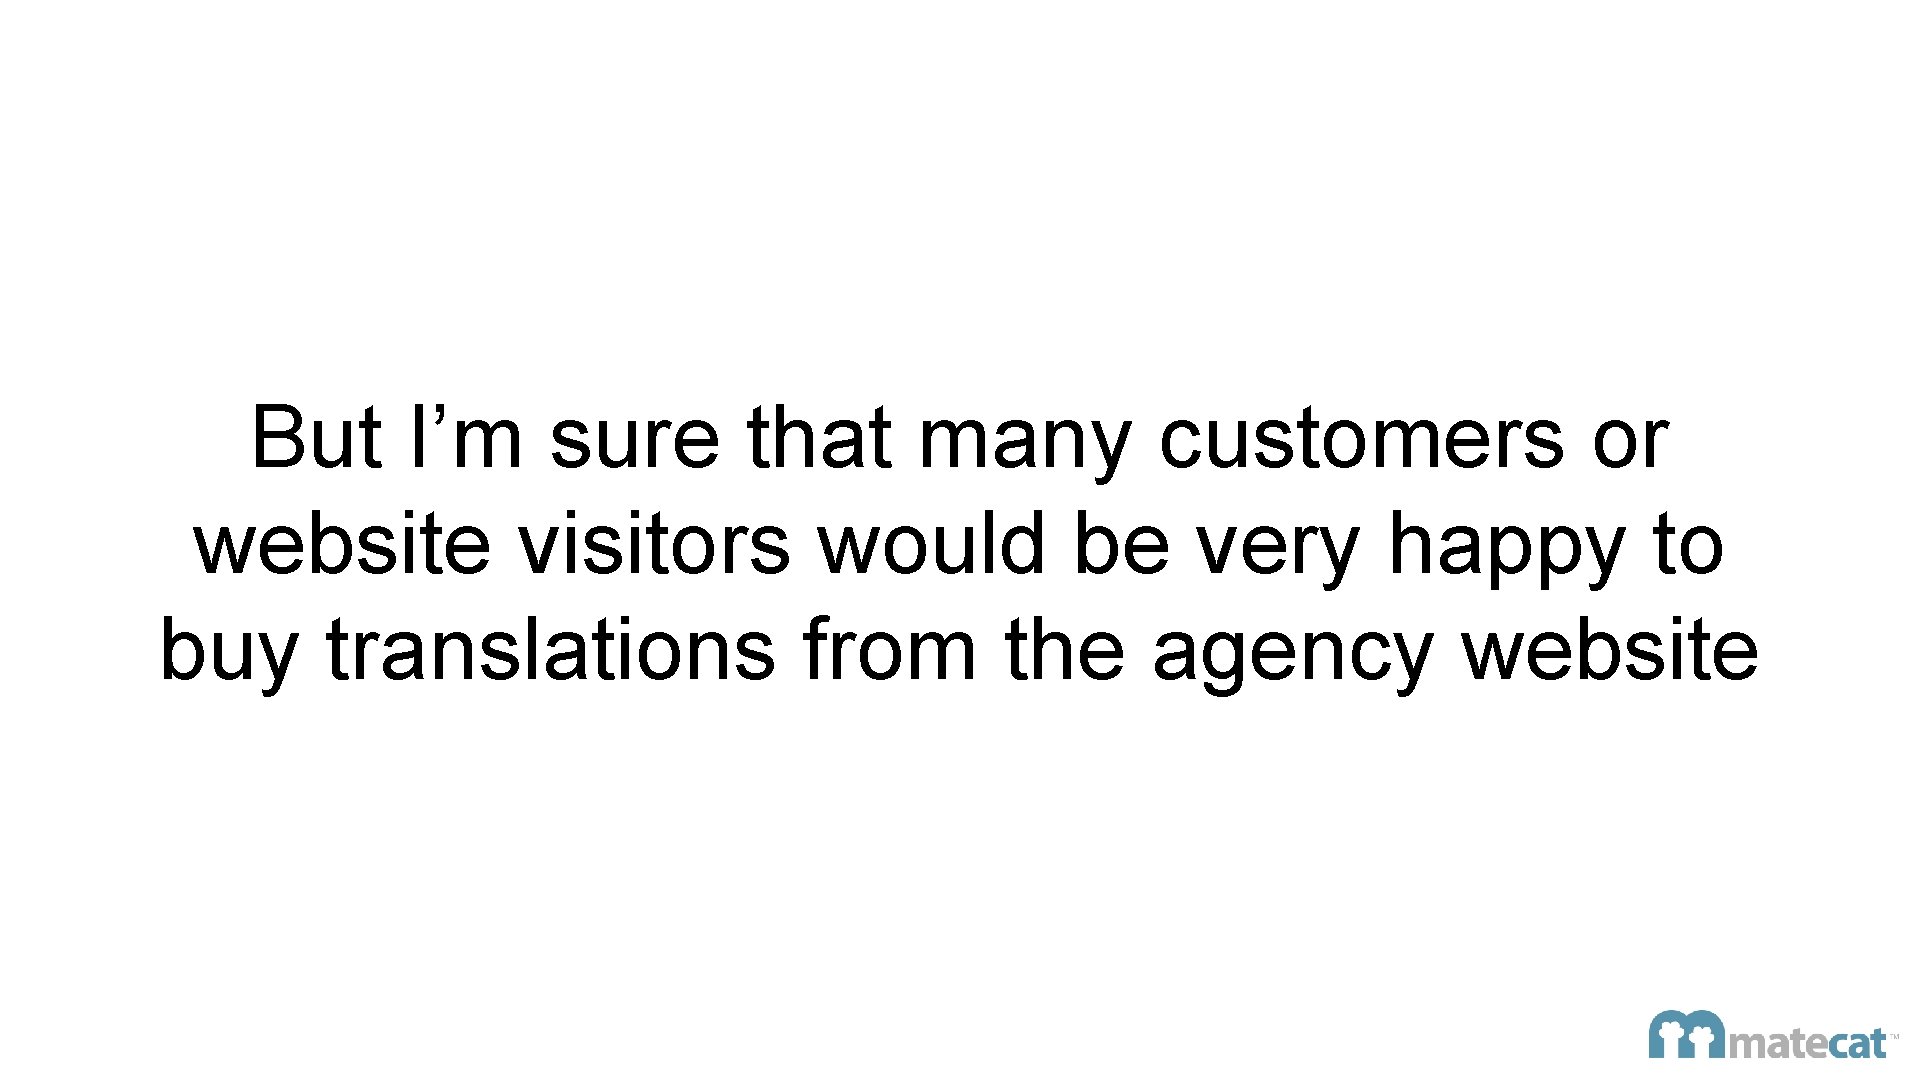 But I’m sure that many customers or website visitors would be very happy to